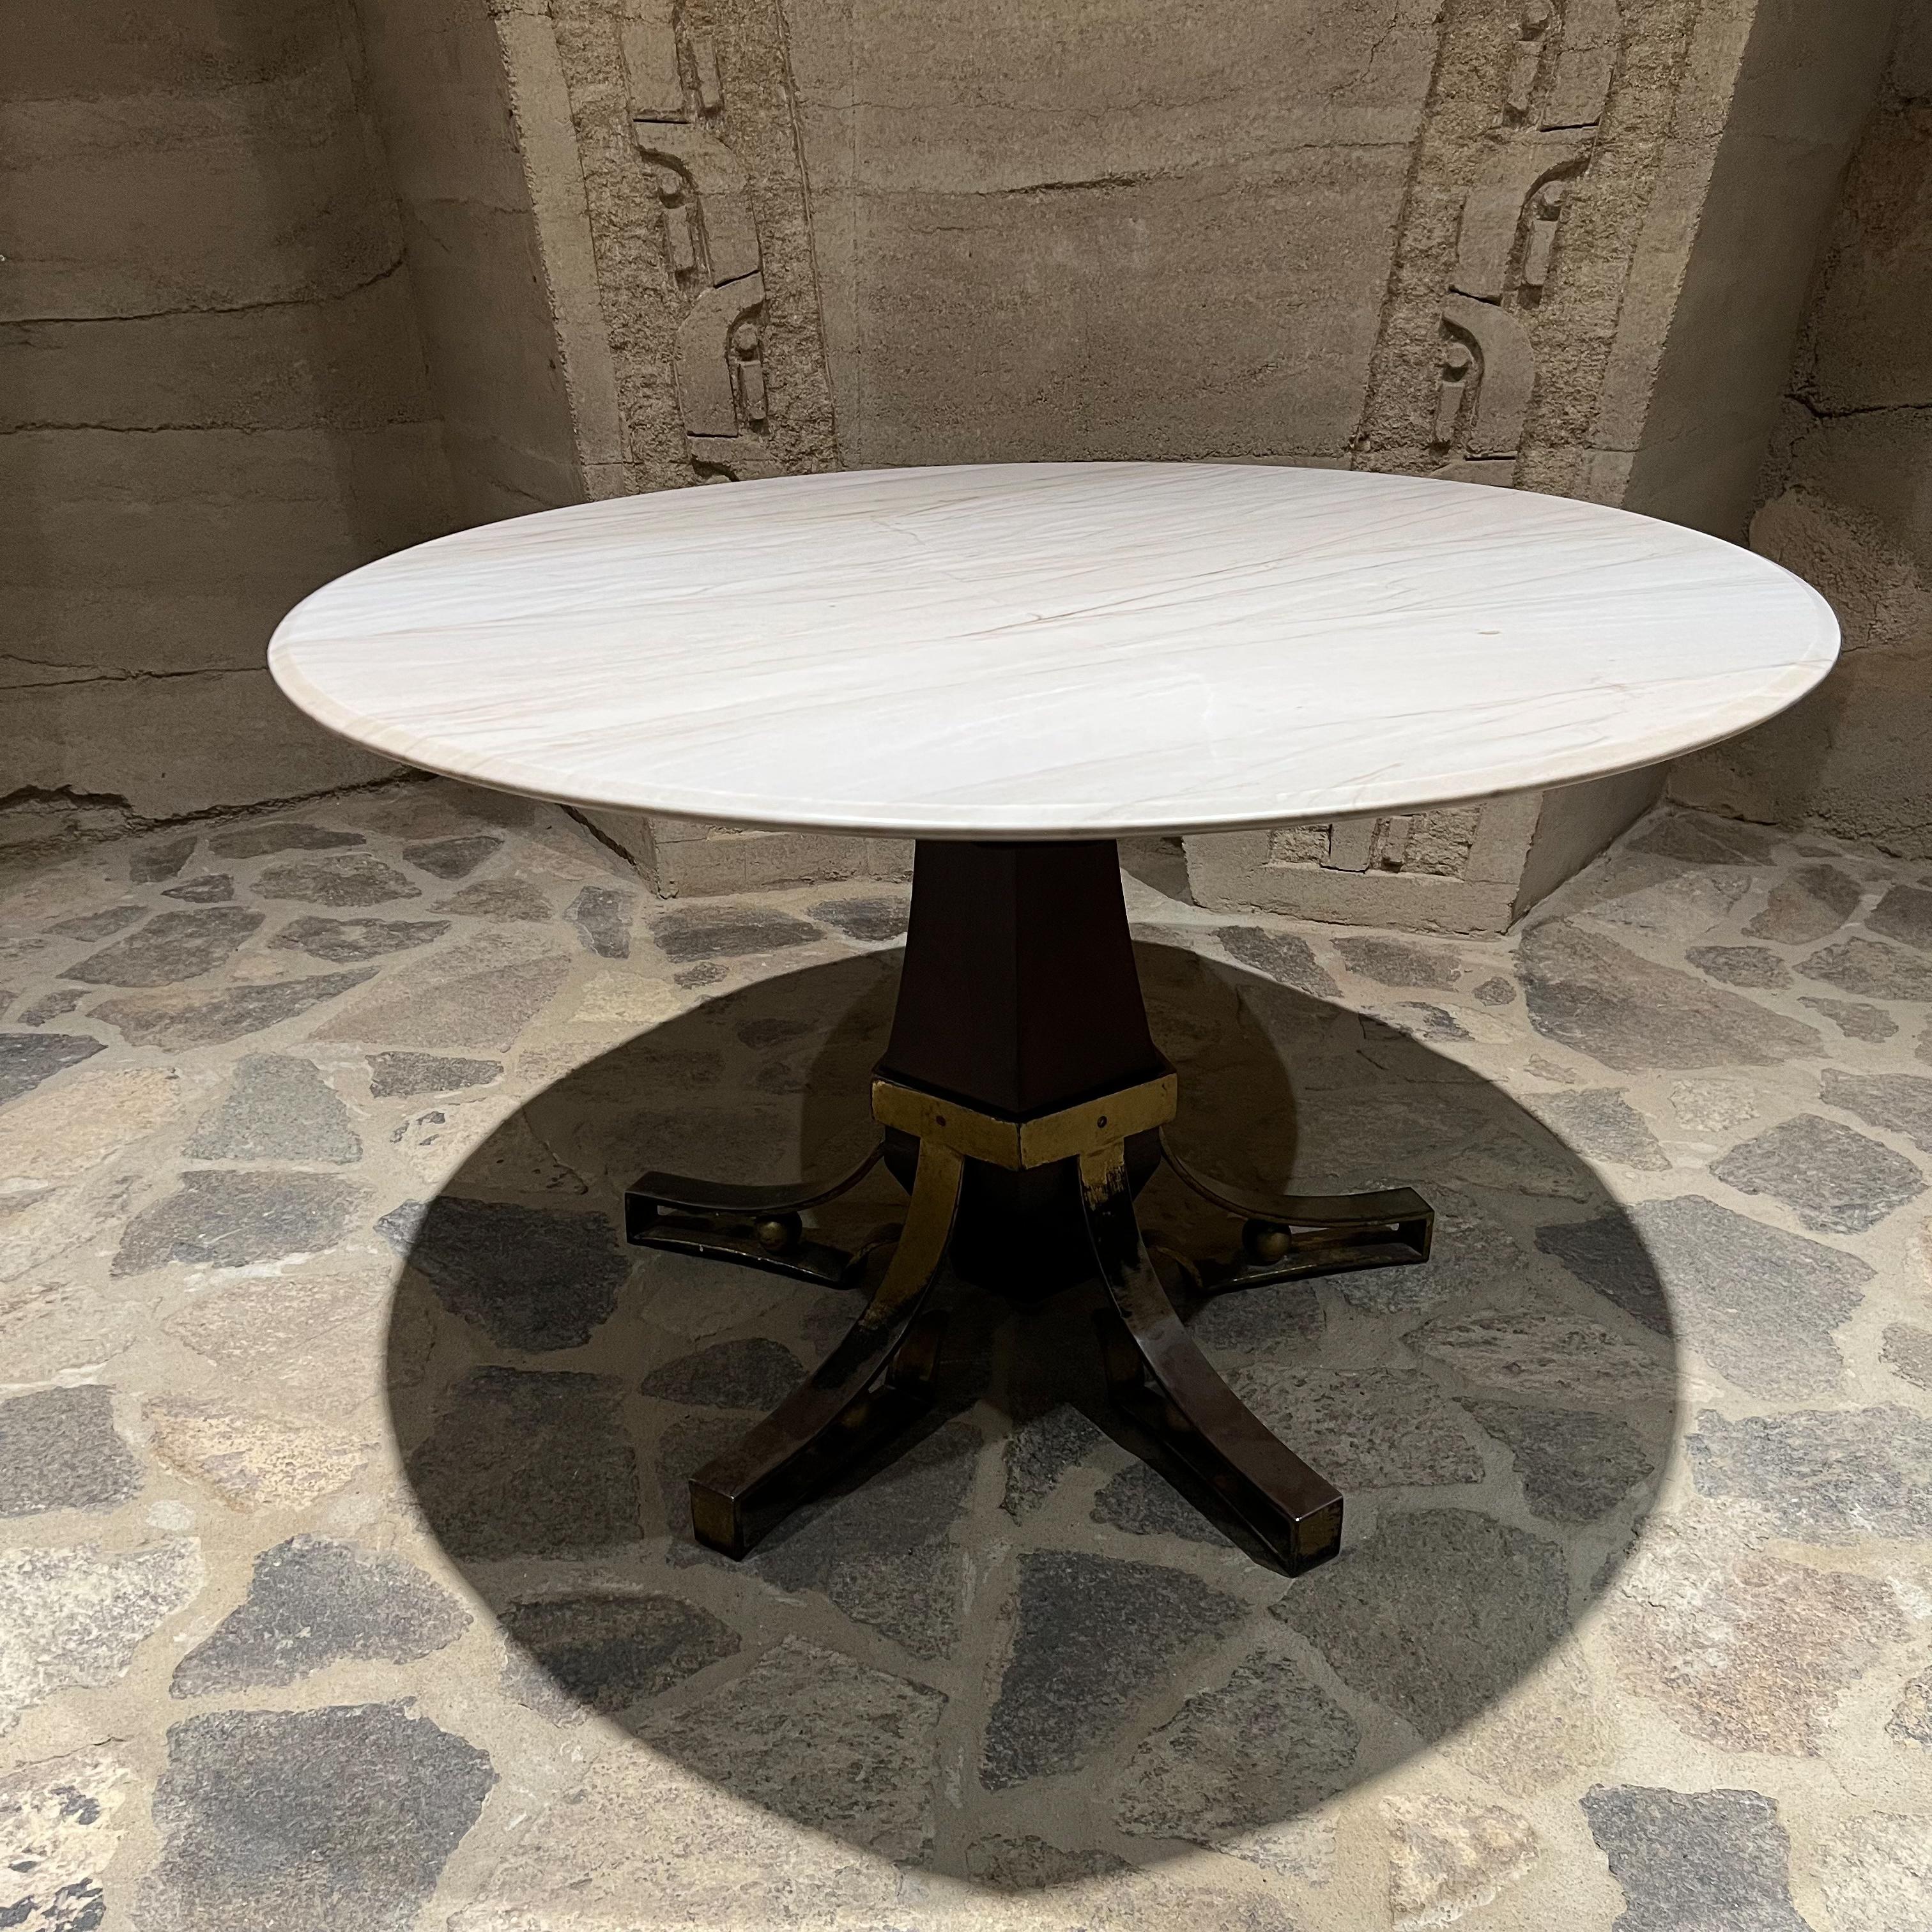 Modernist Dining Table in White Marble Sculptural Base Arturo Pani Mexico City For Sale 4